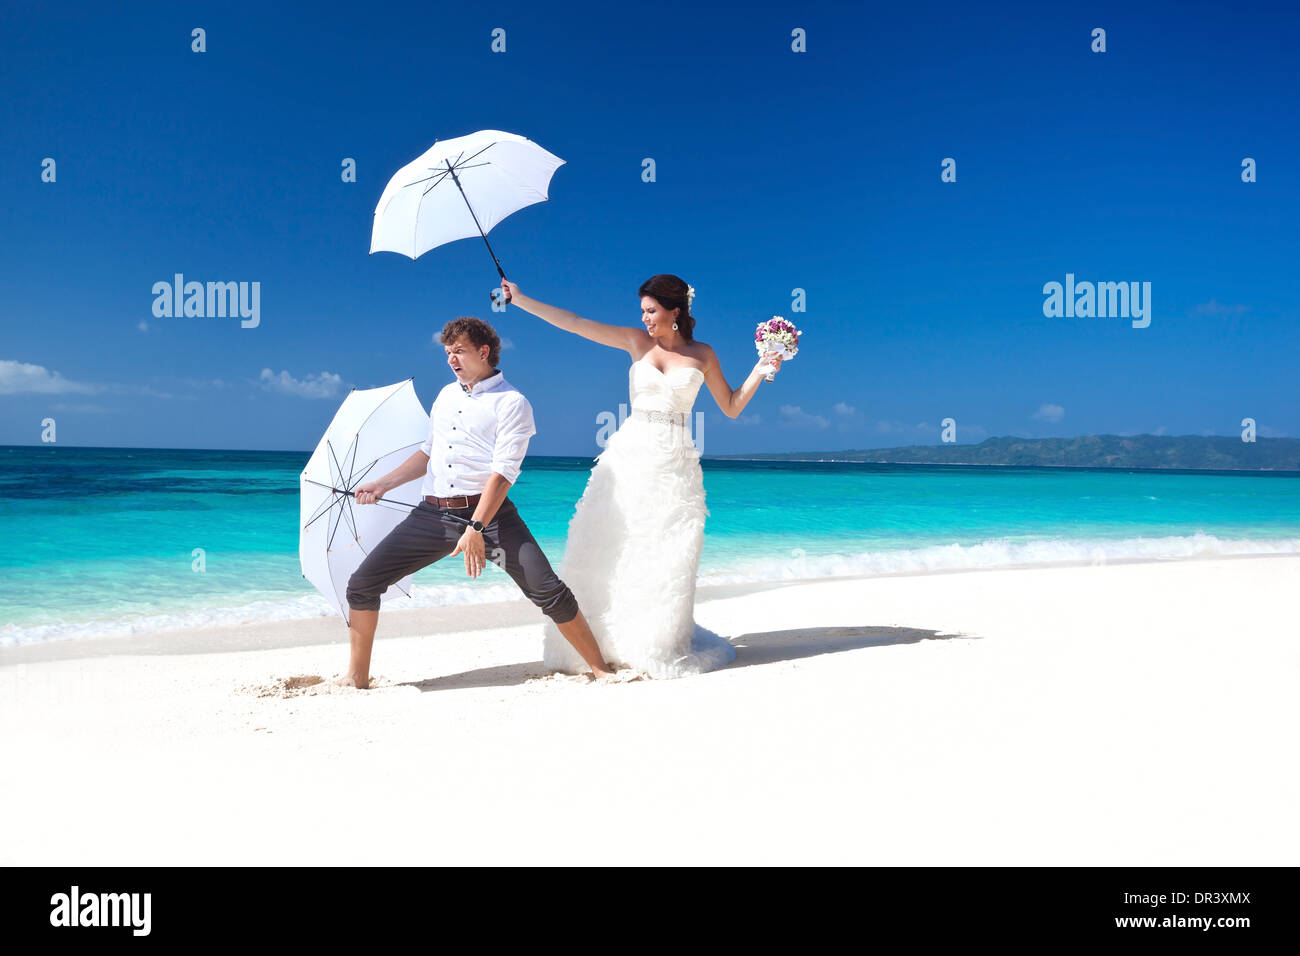 Bride And Groom On The Beach Having Fun With Umbrellas Tropical